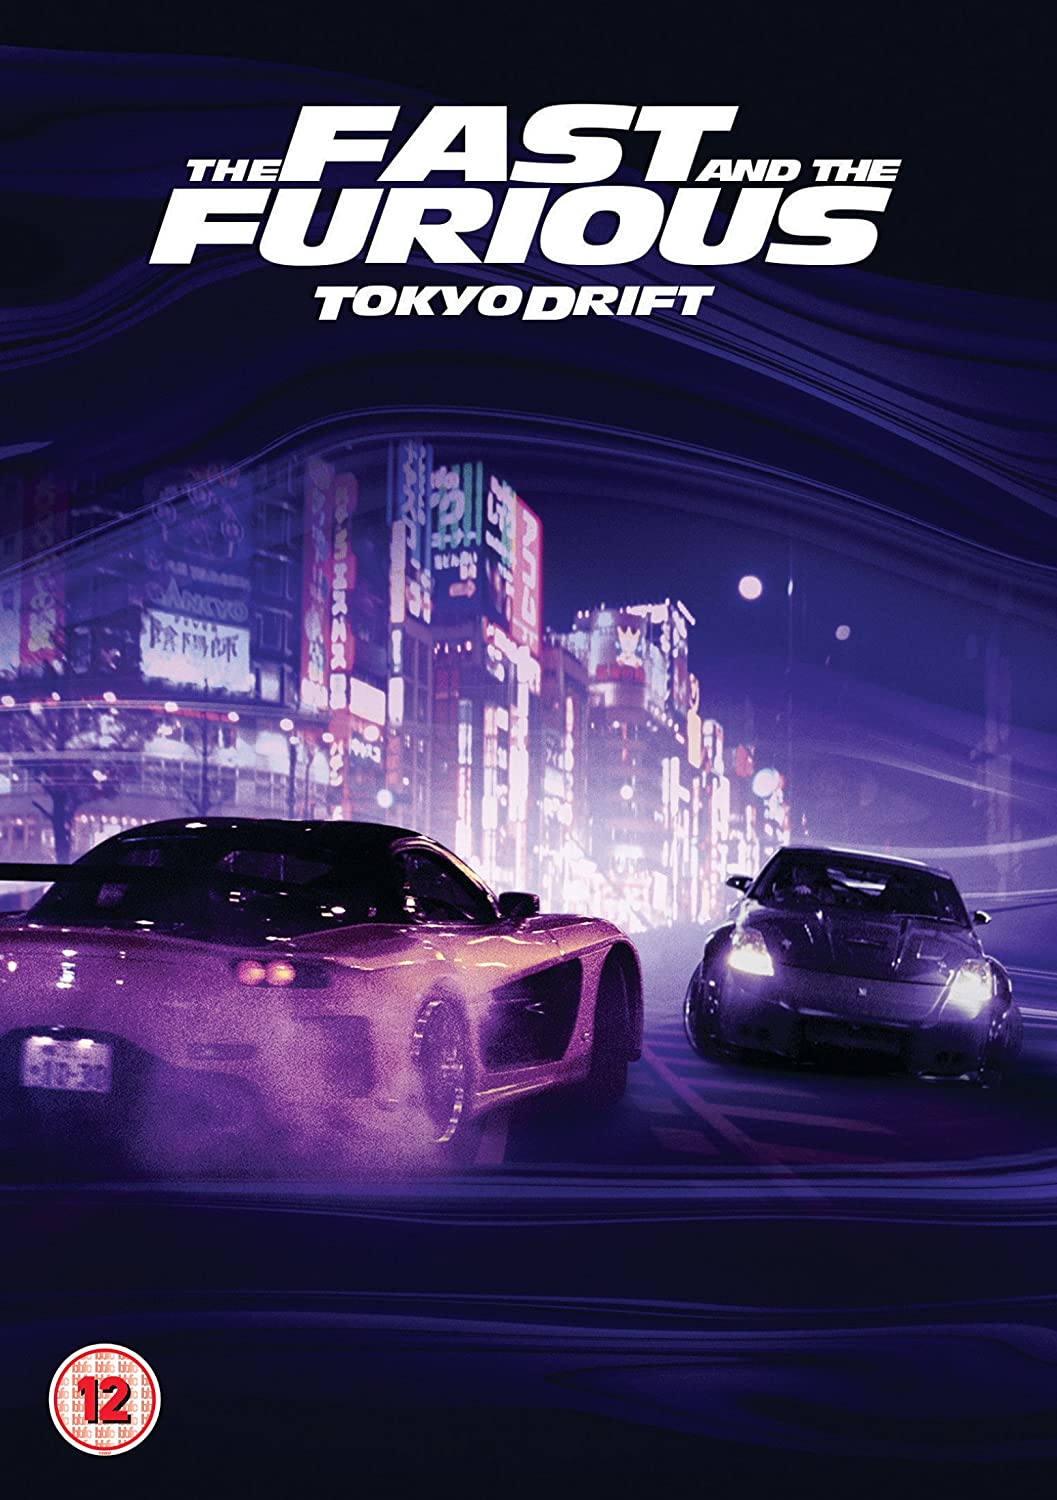 The Fast And The Furious - Tokyo Drift - Action/Crime [DVD]